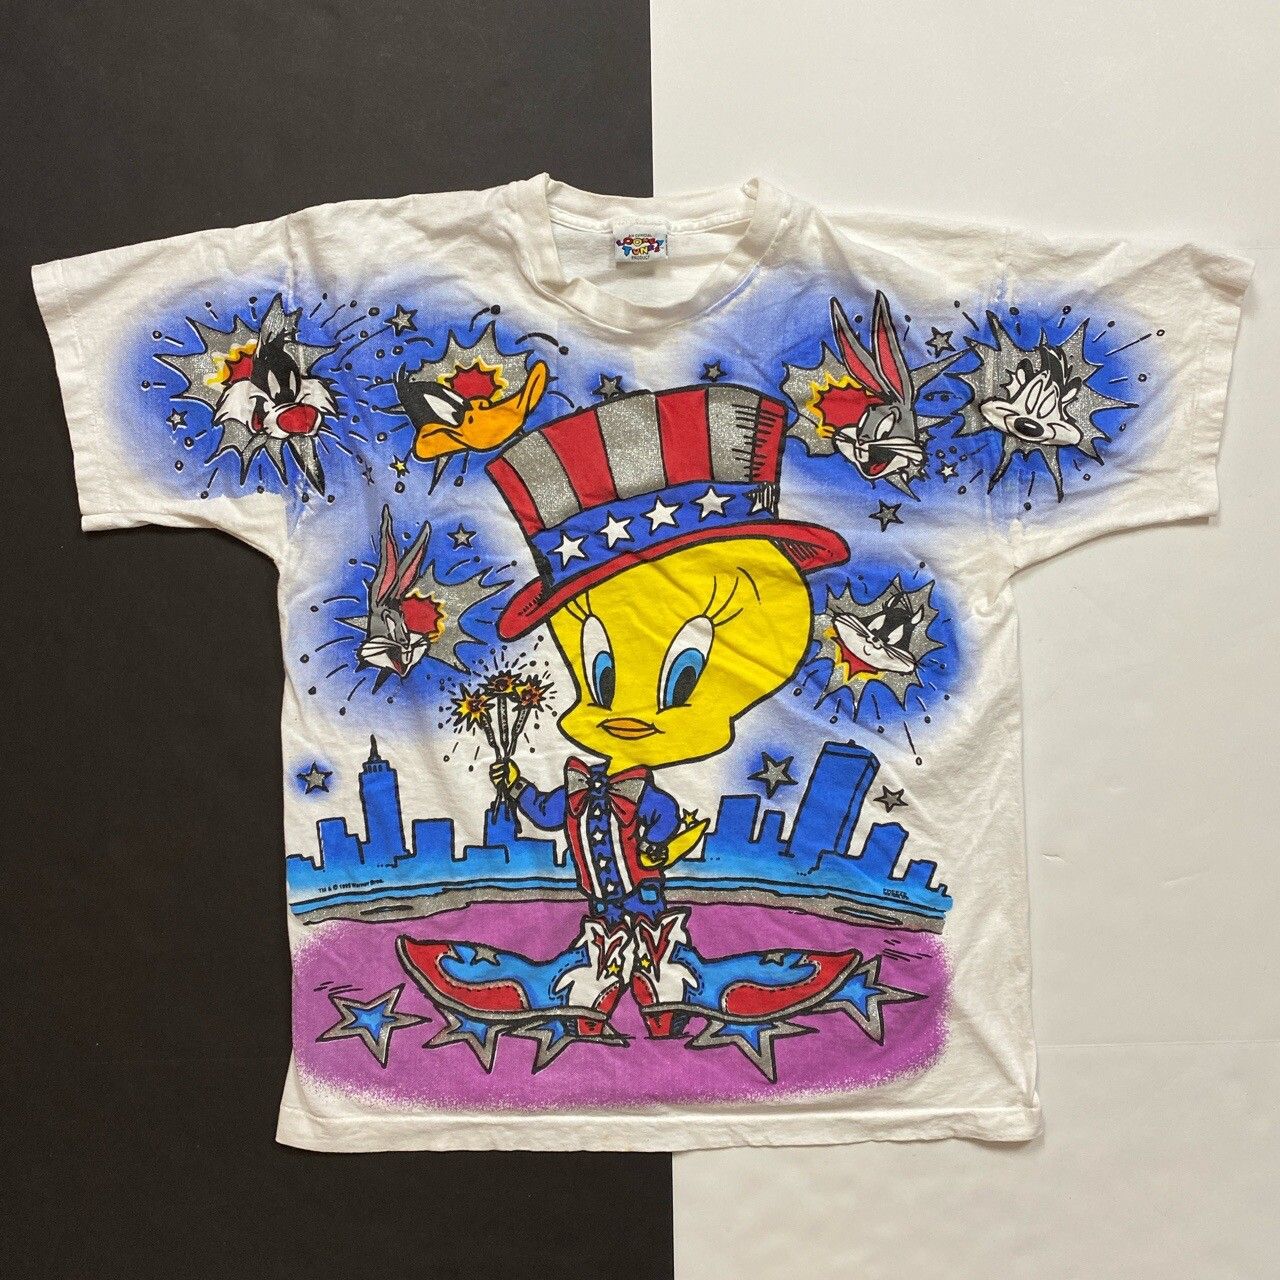 Vintage Vintage 1995 Tweety Looney Tunes America Allover T-shirt Size US XL / EU 56 / 4 - 2 Preview